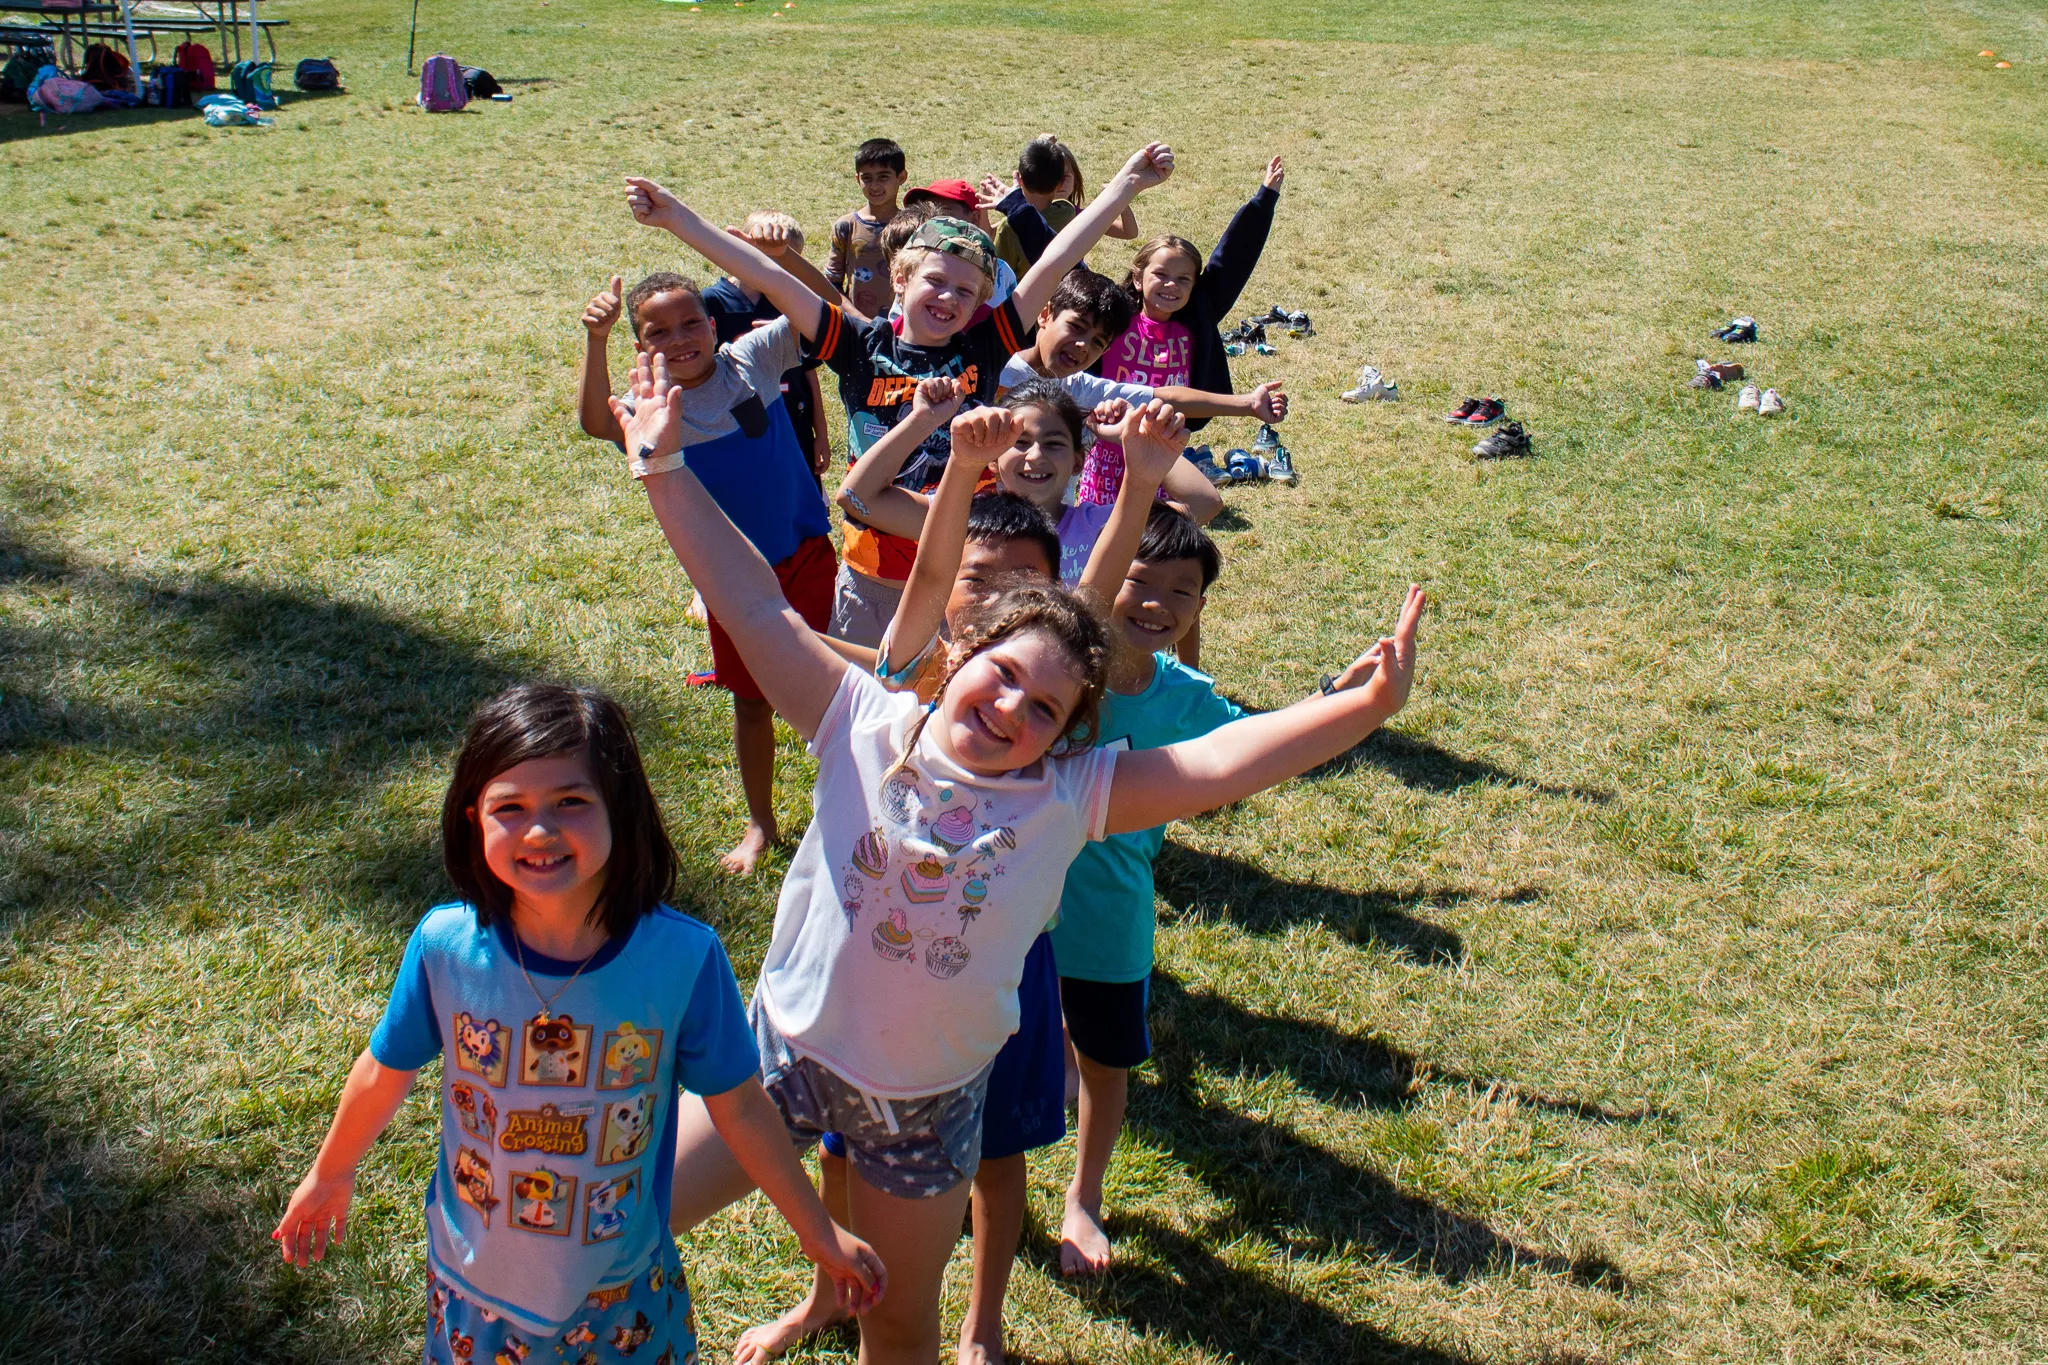 Children putting their arms up and smiling at camp